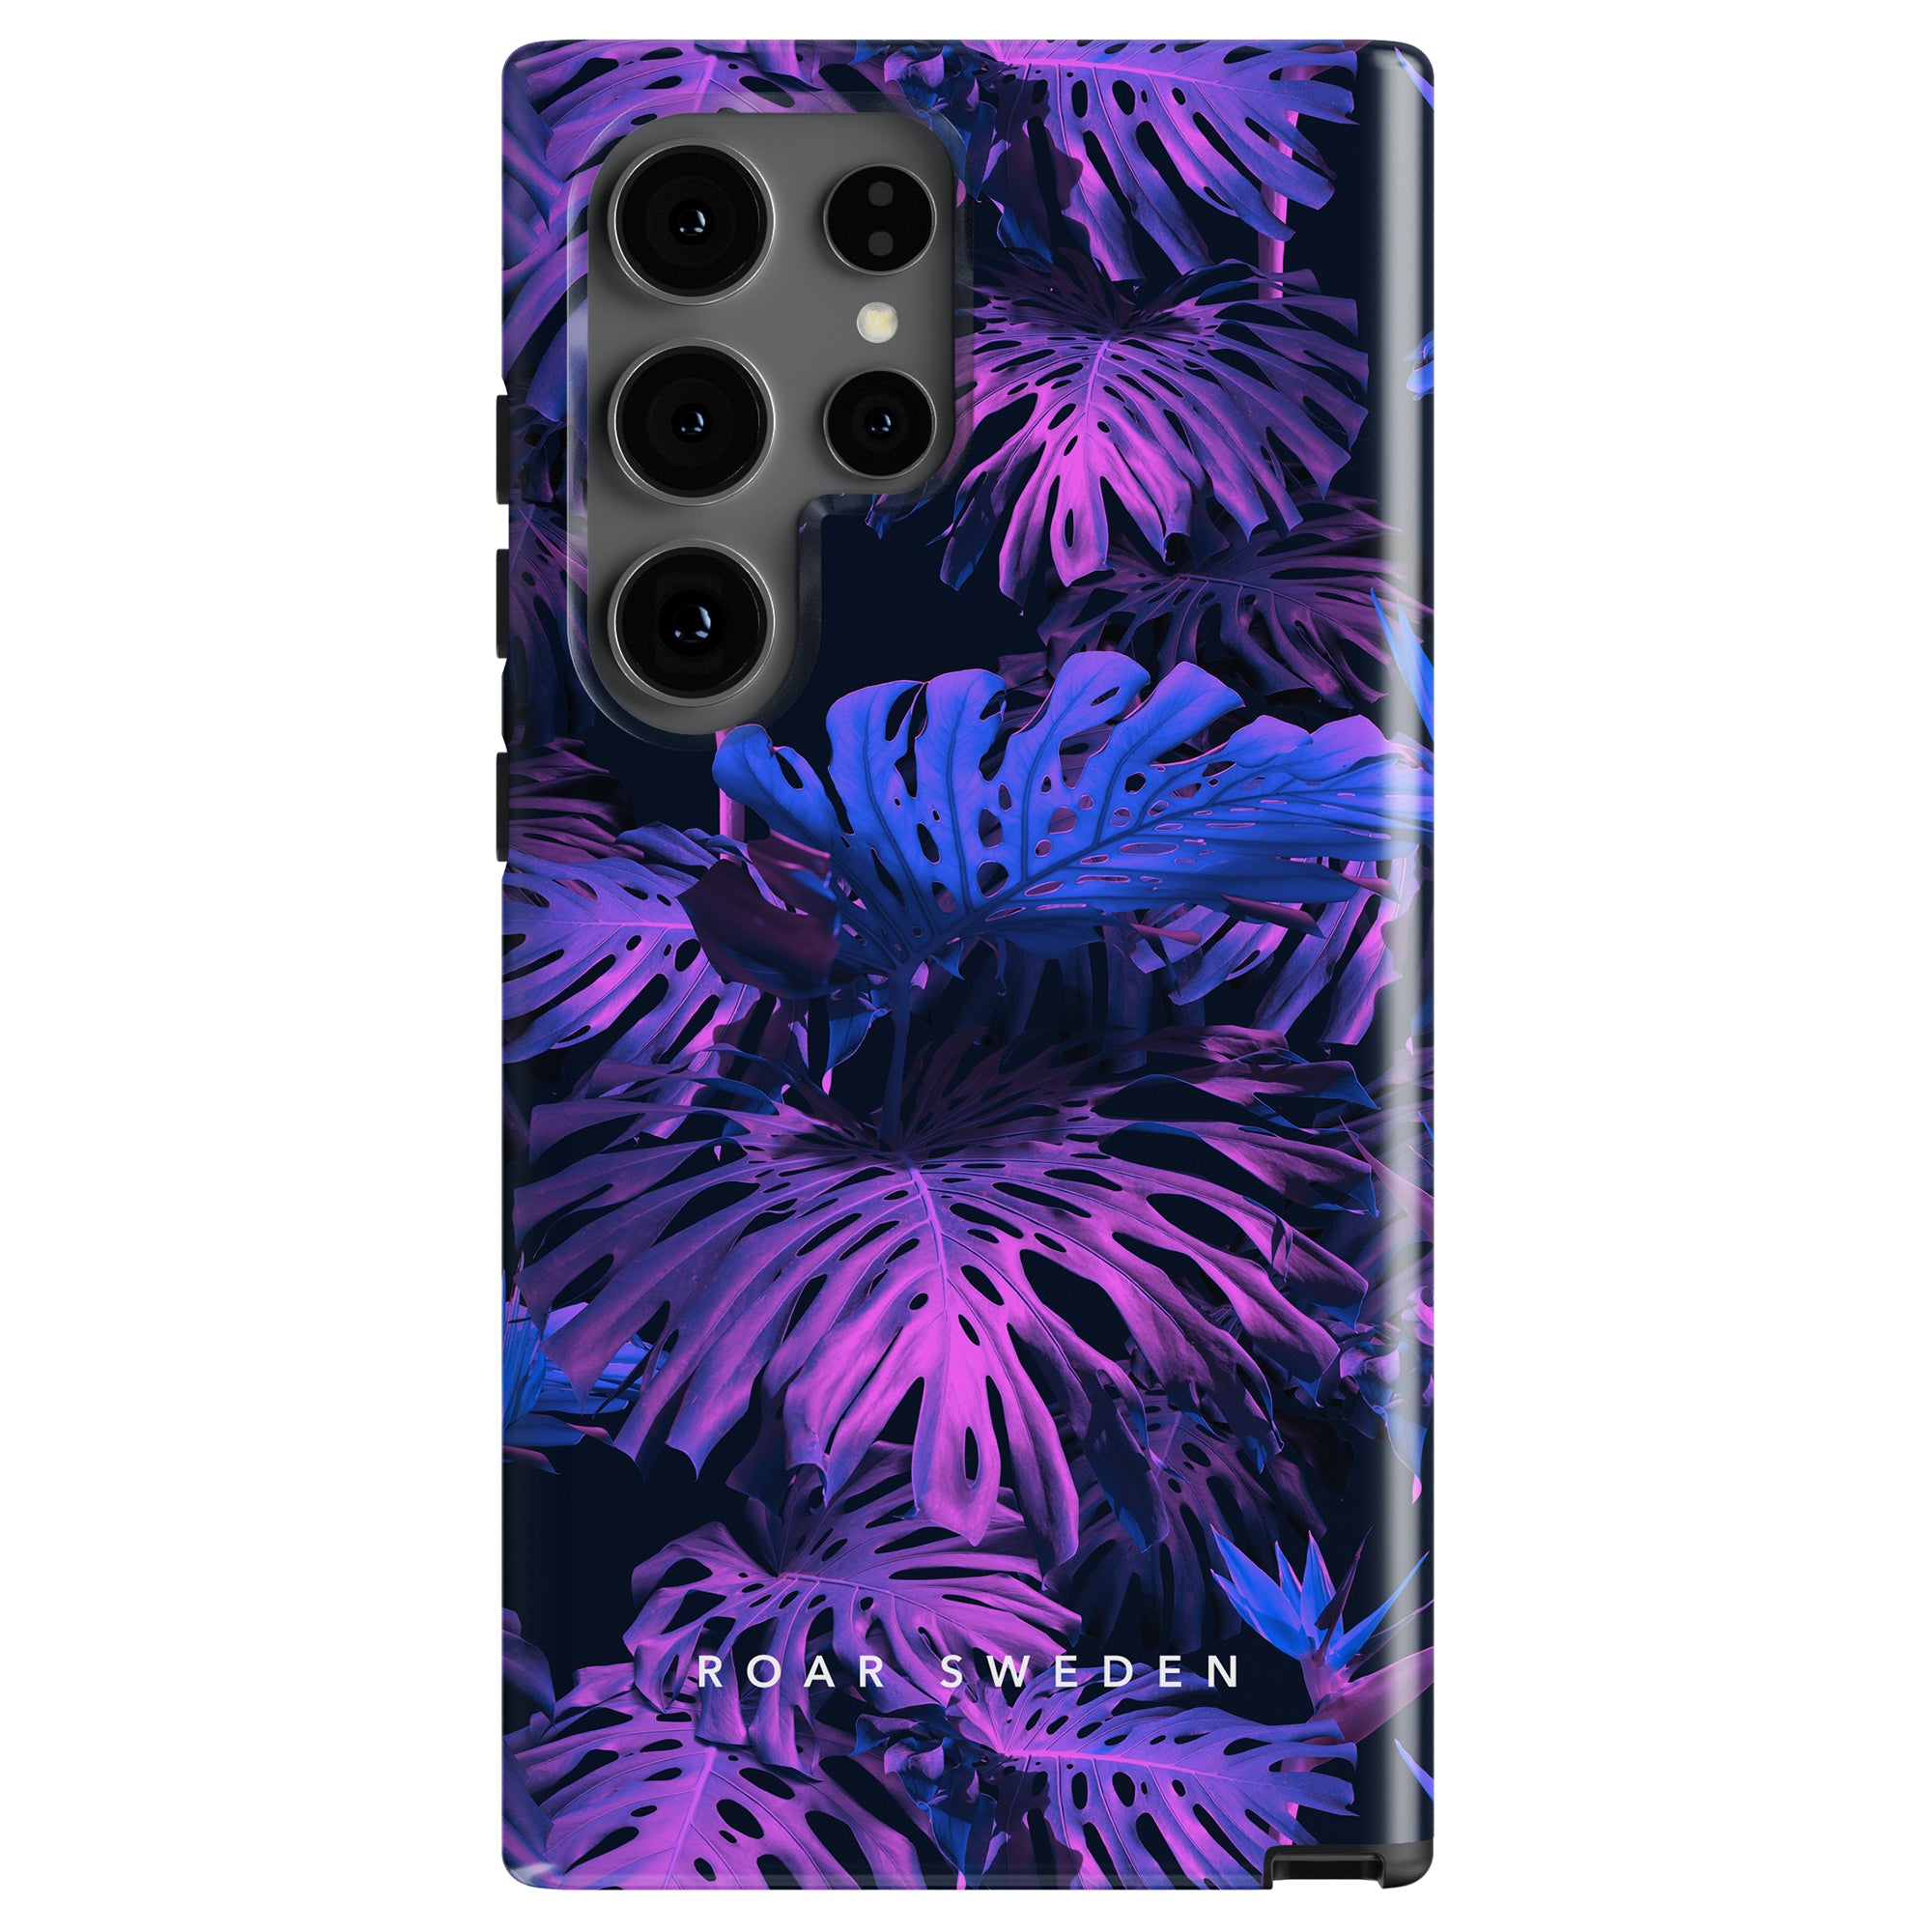 A smartphone with a Monstera Night - Tough case featuring tropical purple foliage and three vertically aligned camera lenses. The bottom of the mobilskal is labeled "ROAR SWEDEN," offering both style and robust smartphone skydd.